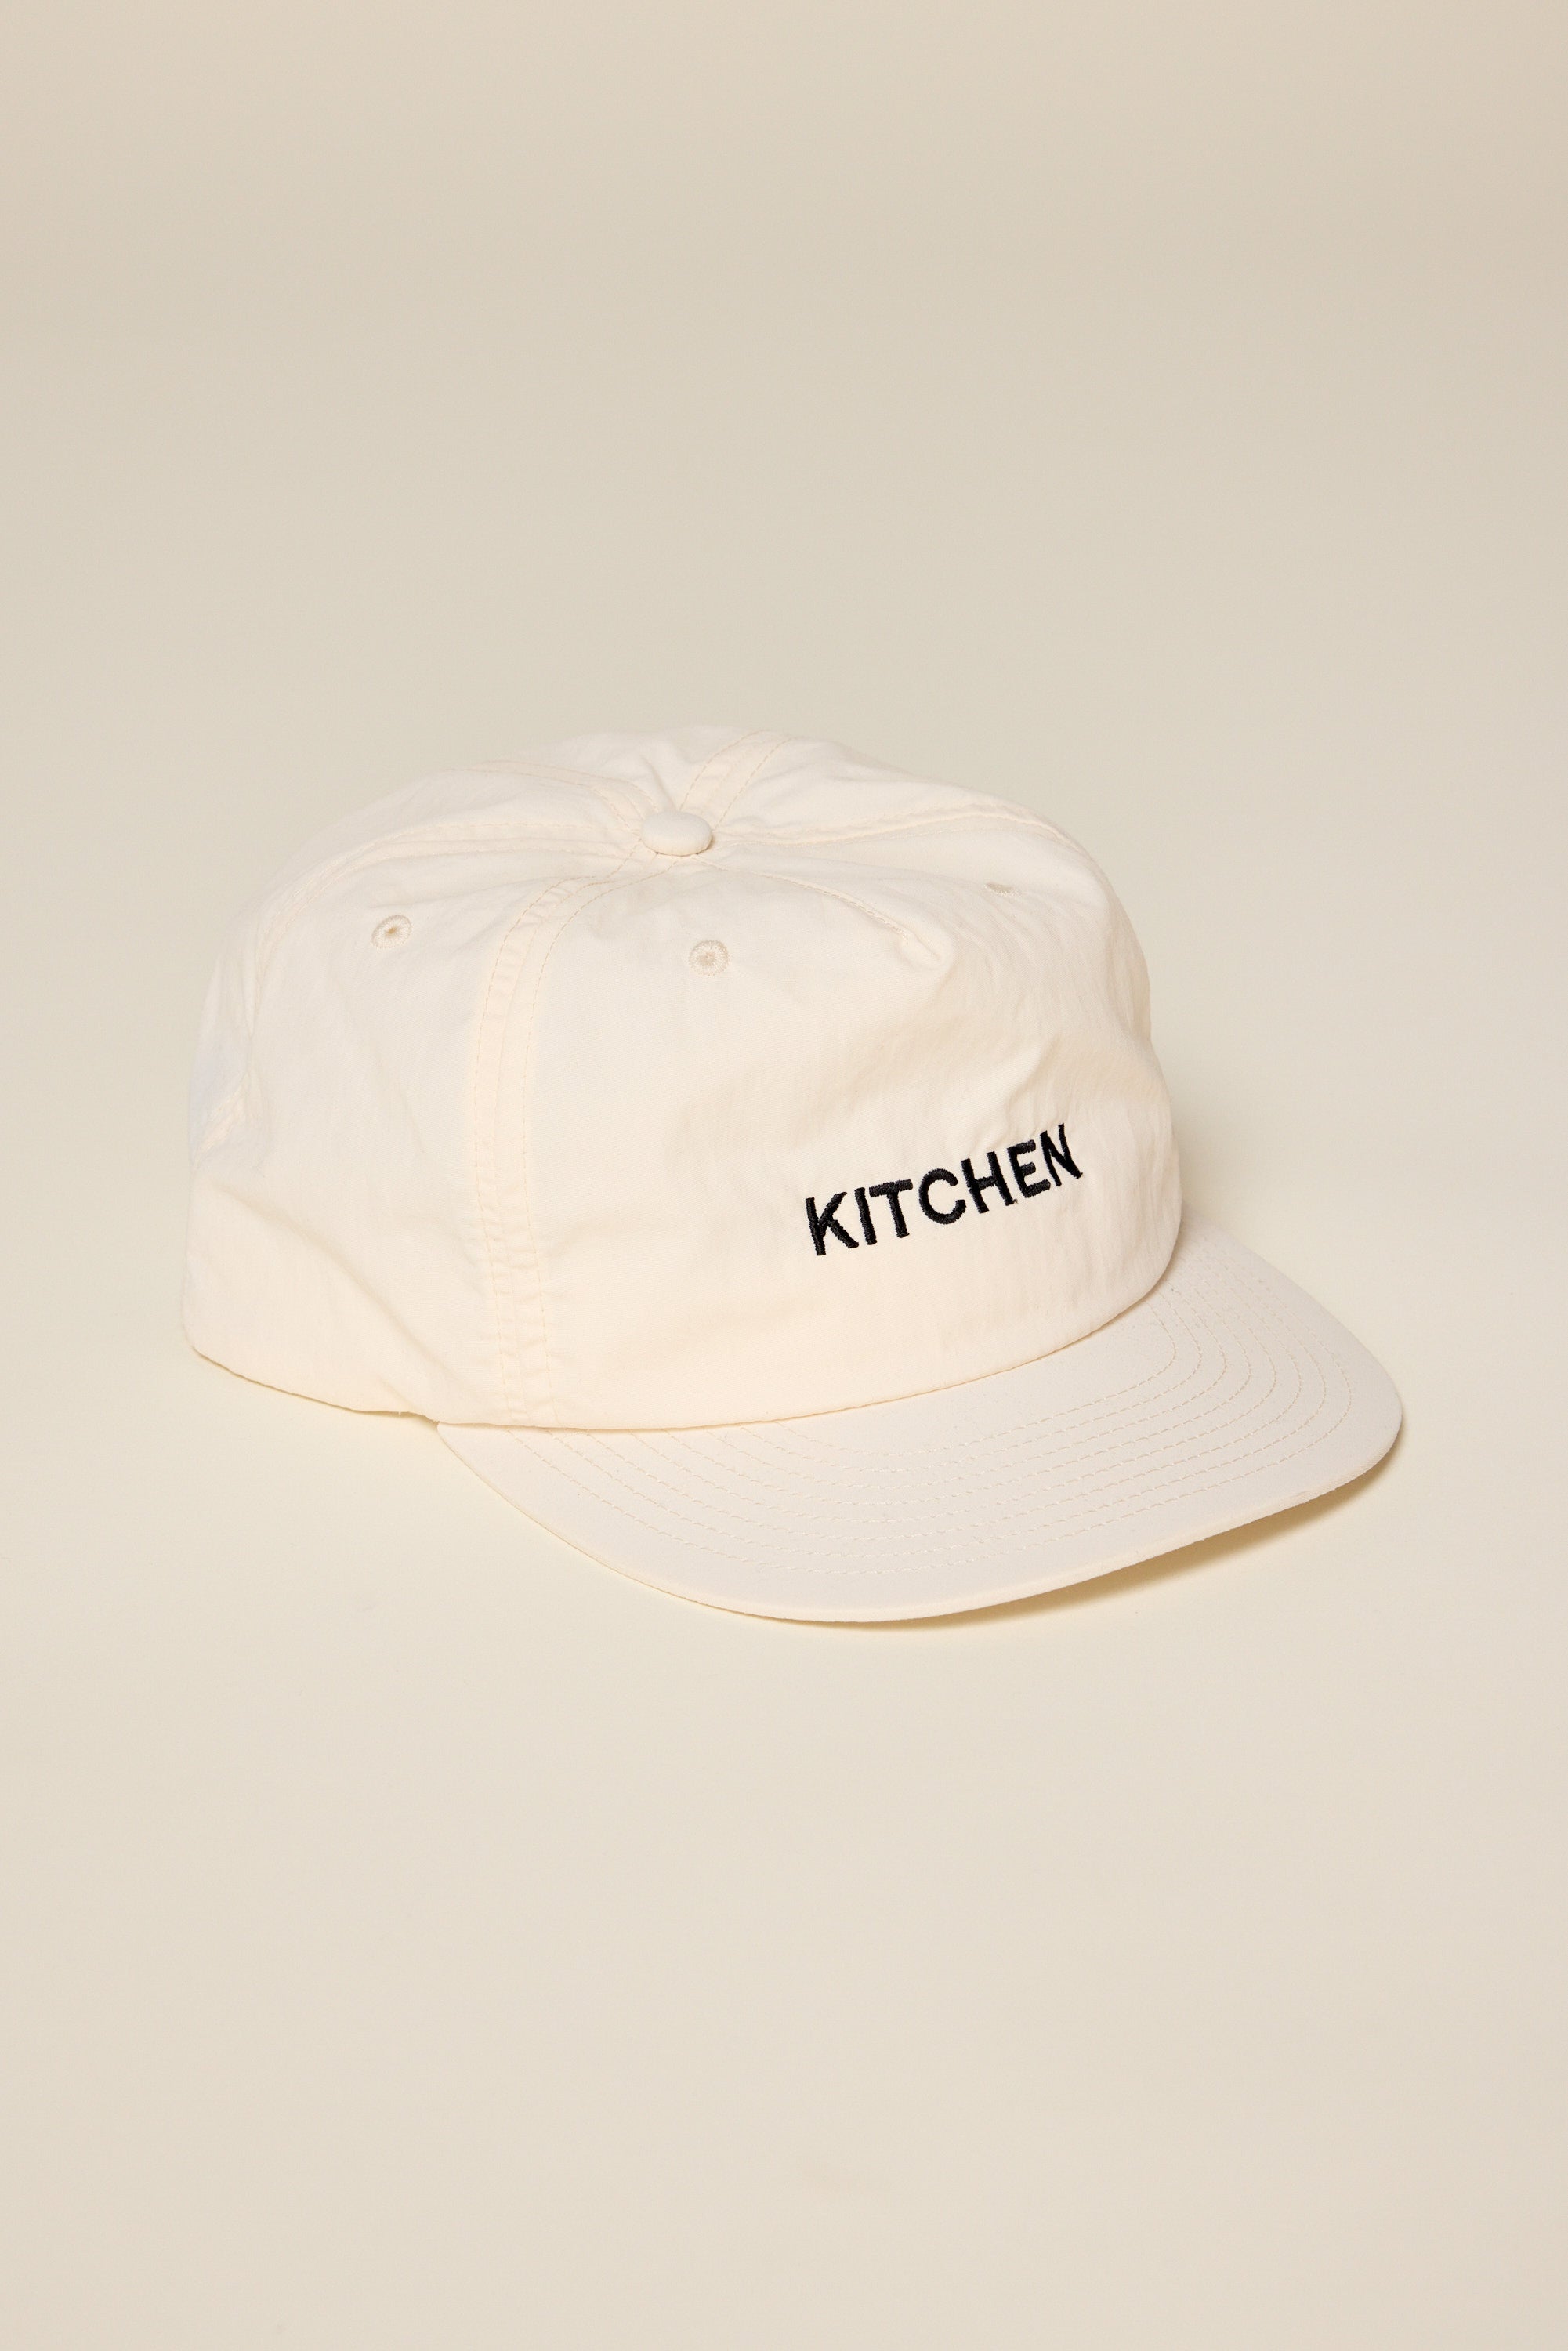 Beige hat embroided with the word Kitchen. the emboidery color is black